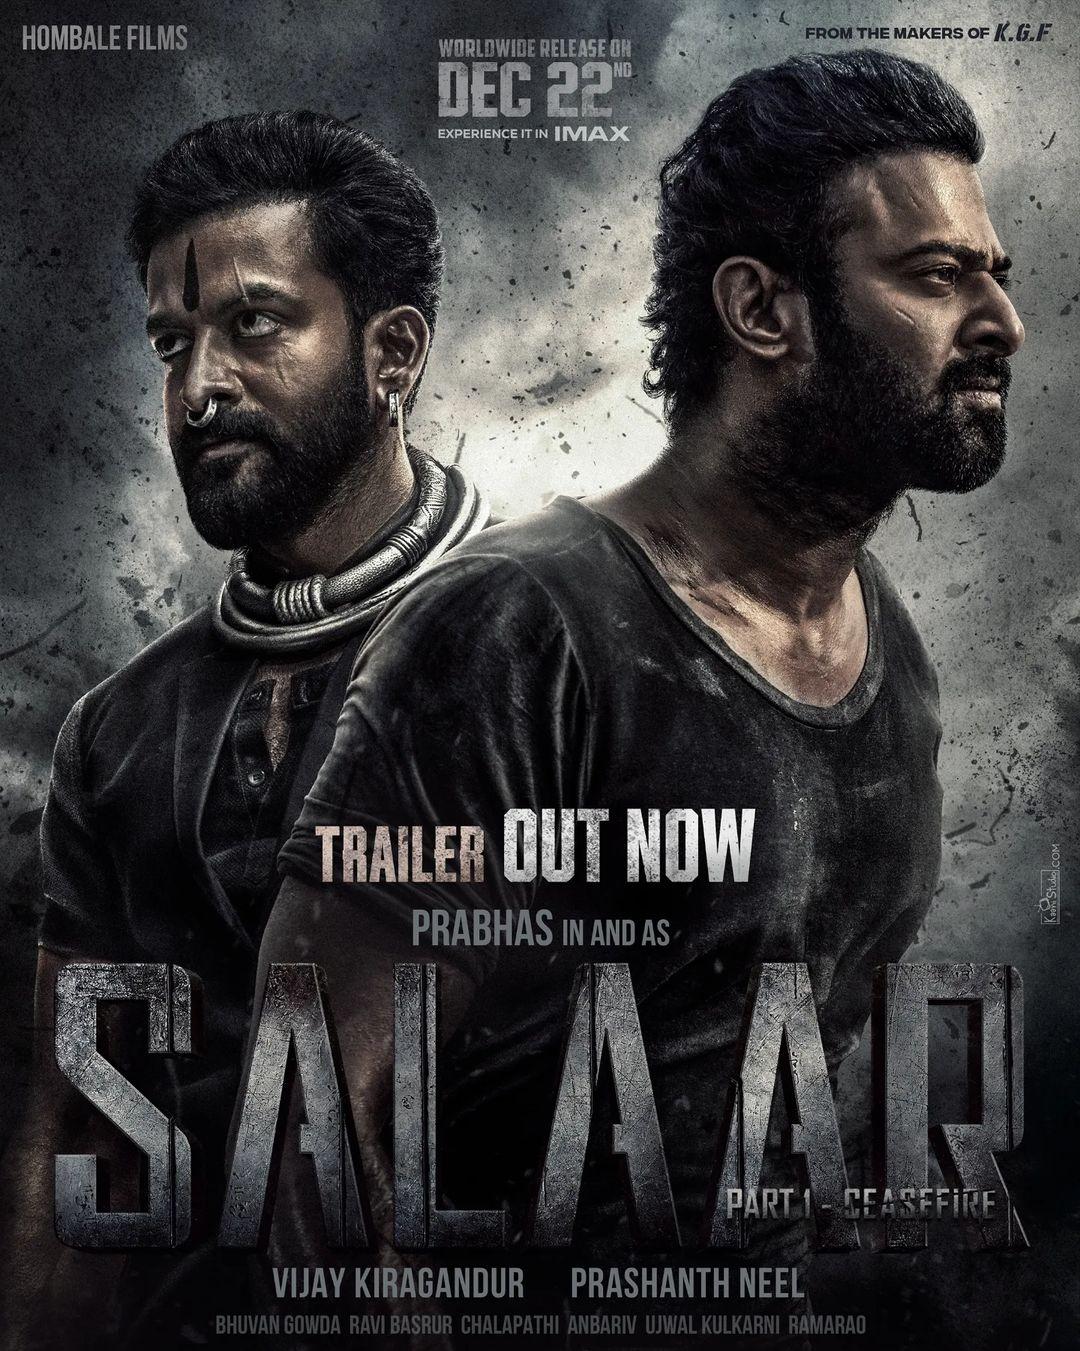 The trailer of Salaar was released on December 1. With it, we got a glimpse into the world of love-hate-violence and the friendship between Prithviraj and Prabhas' characters